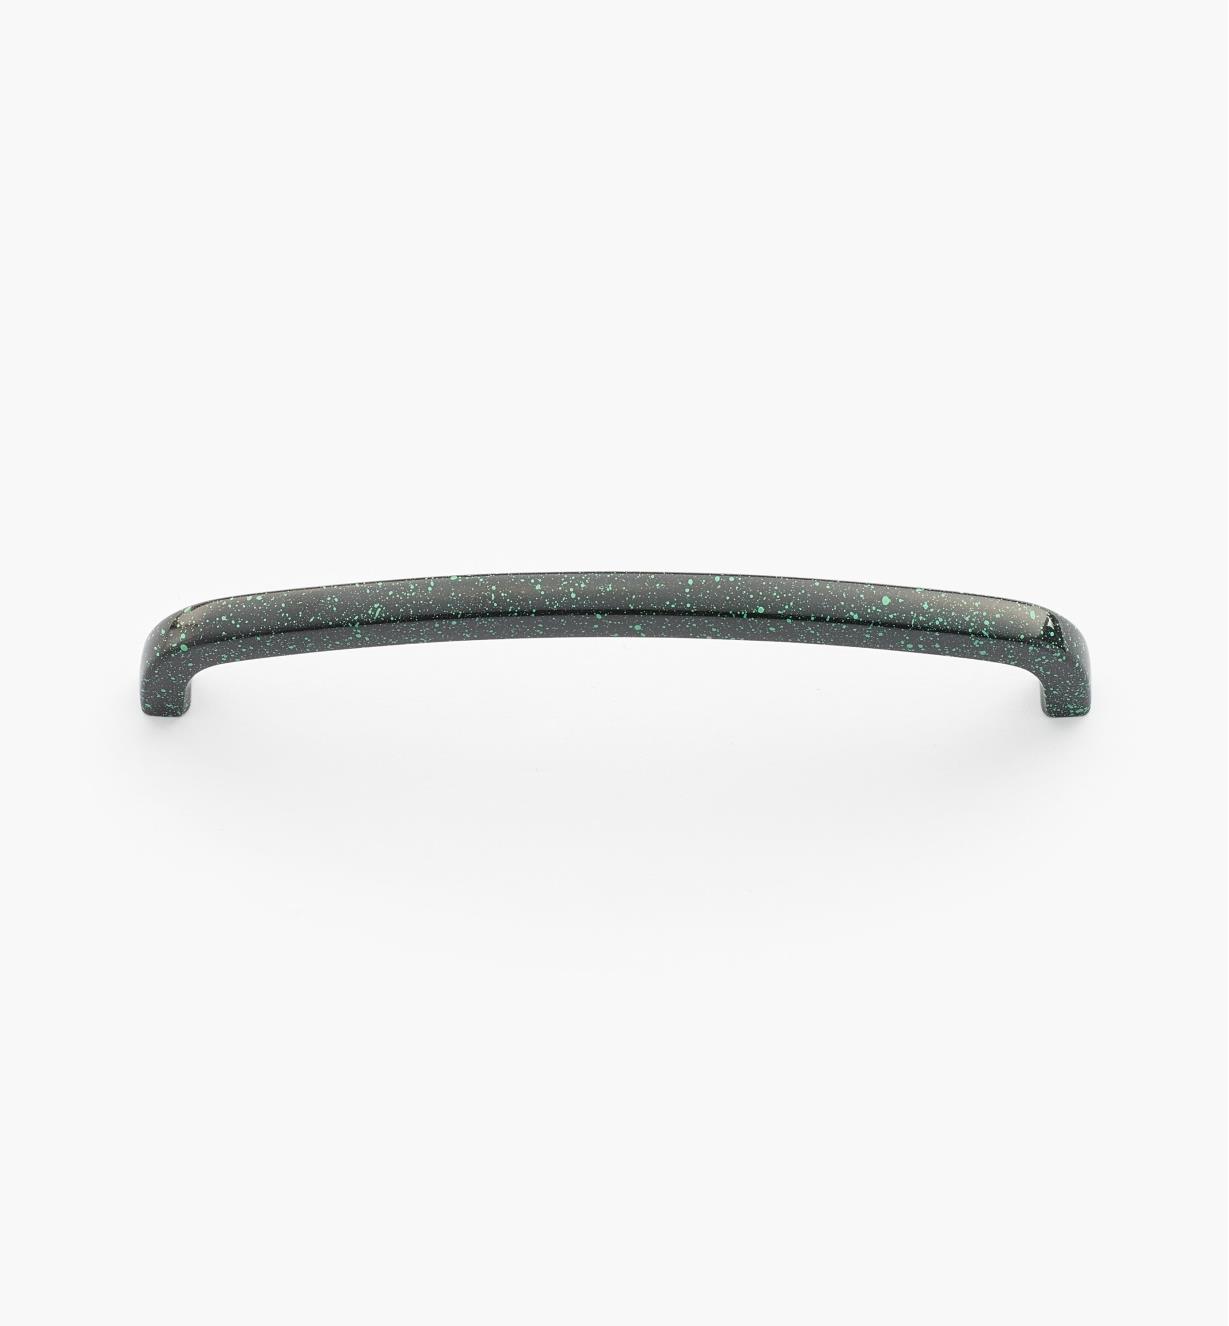 00W4531 - 128mm Speckled Green Wire Pull